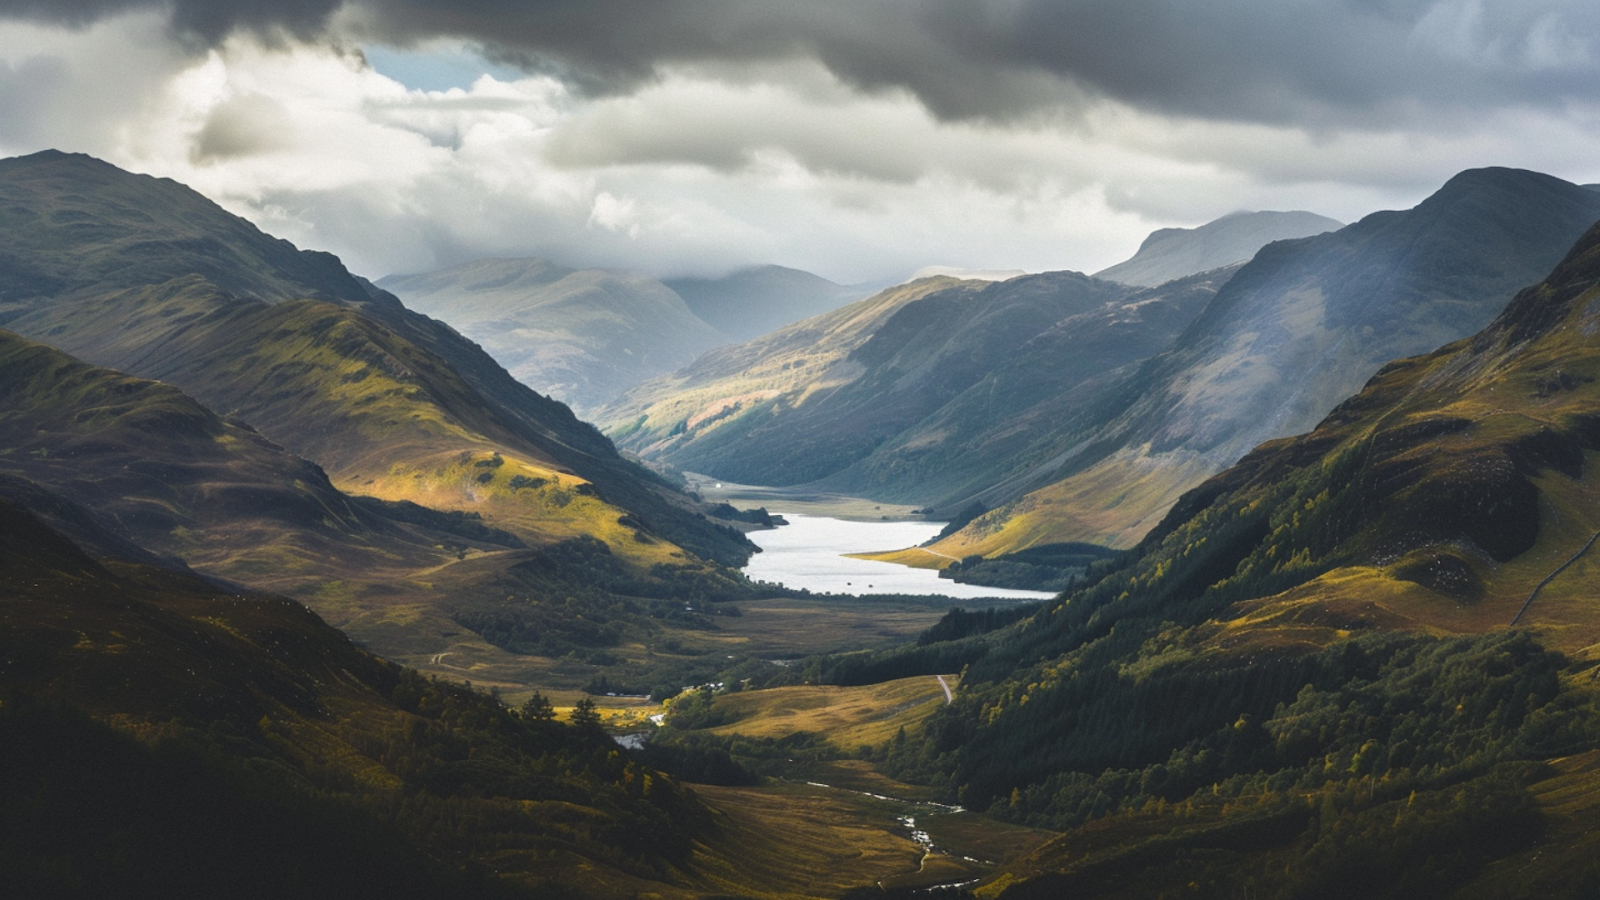 A panoramic view of the Scottish Highlands in Scotland